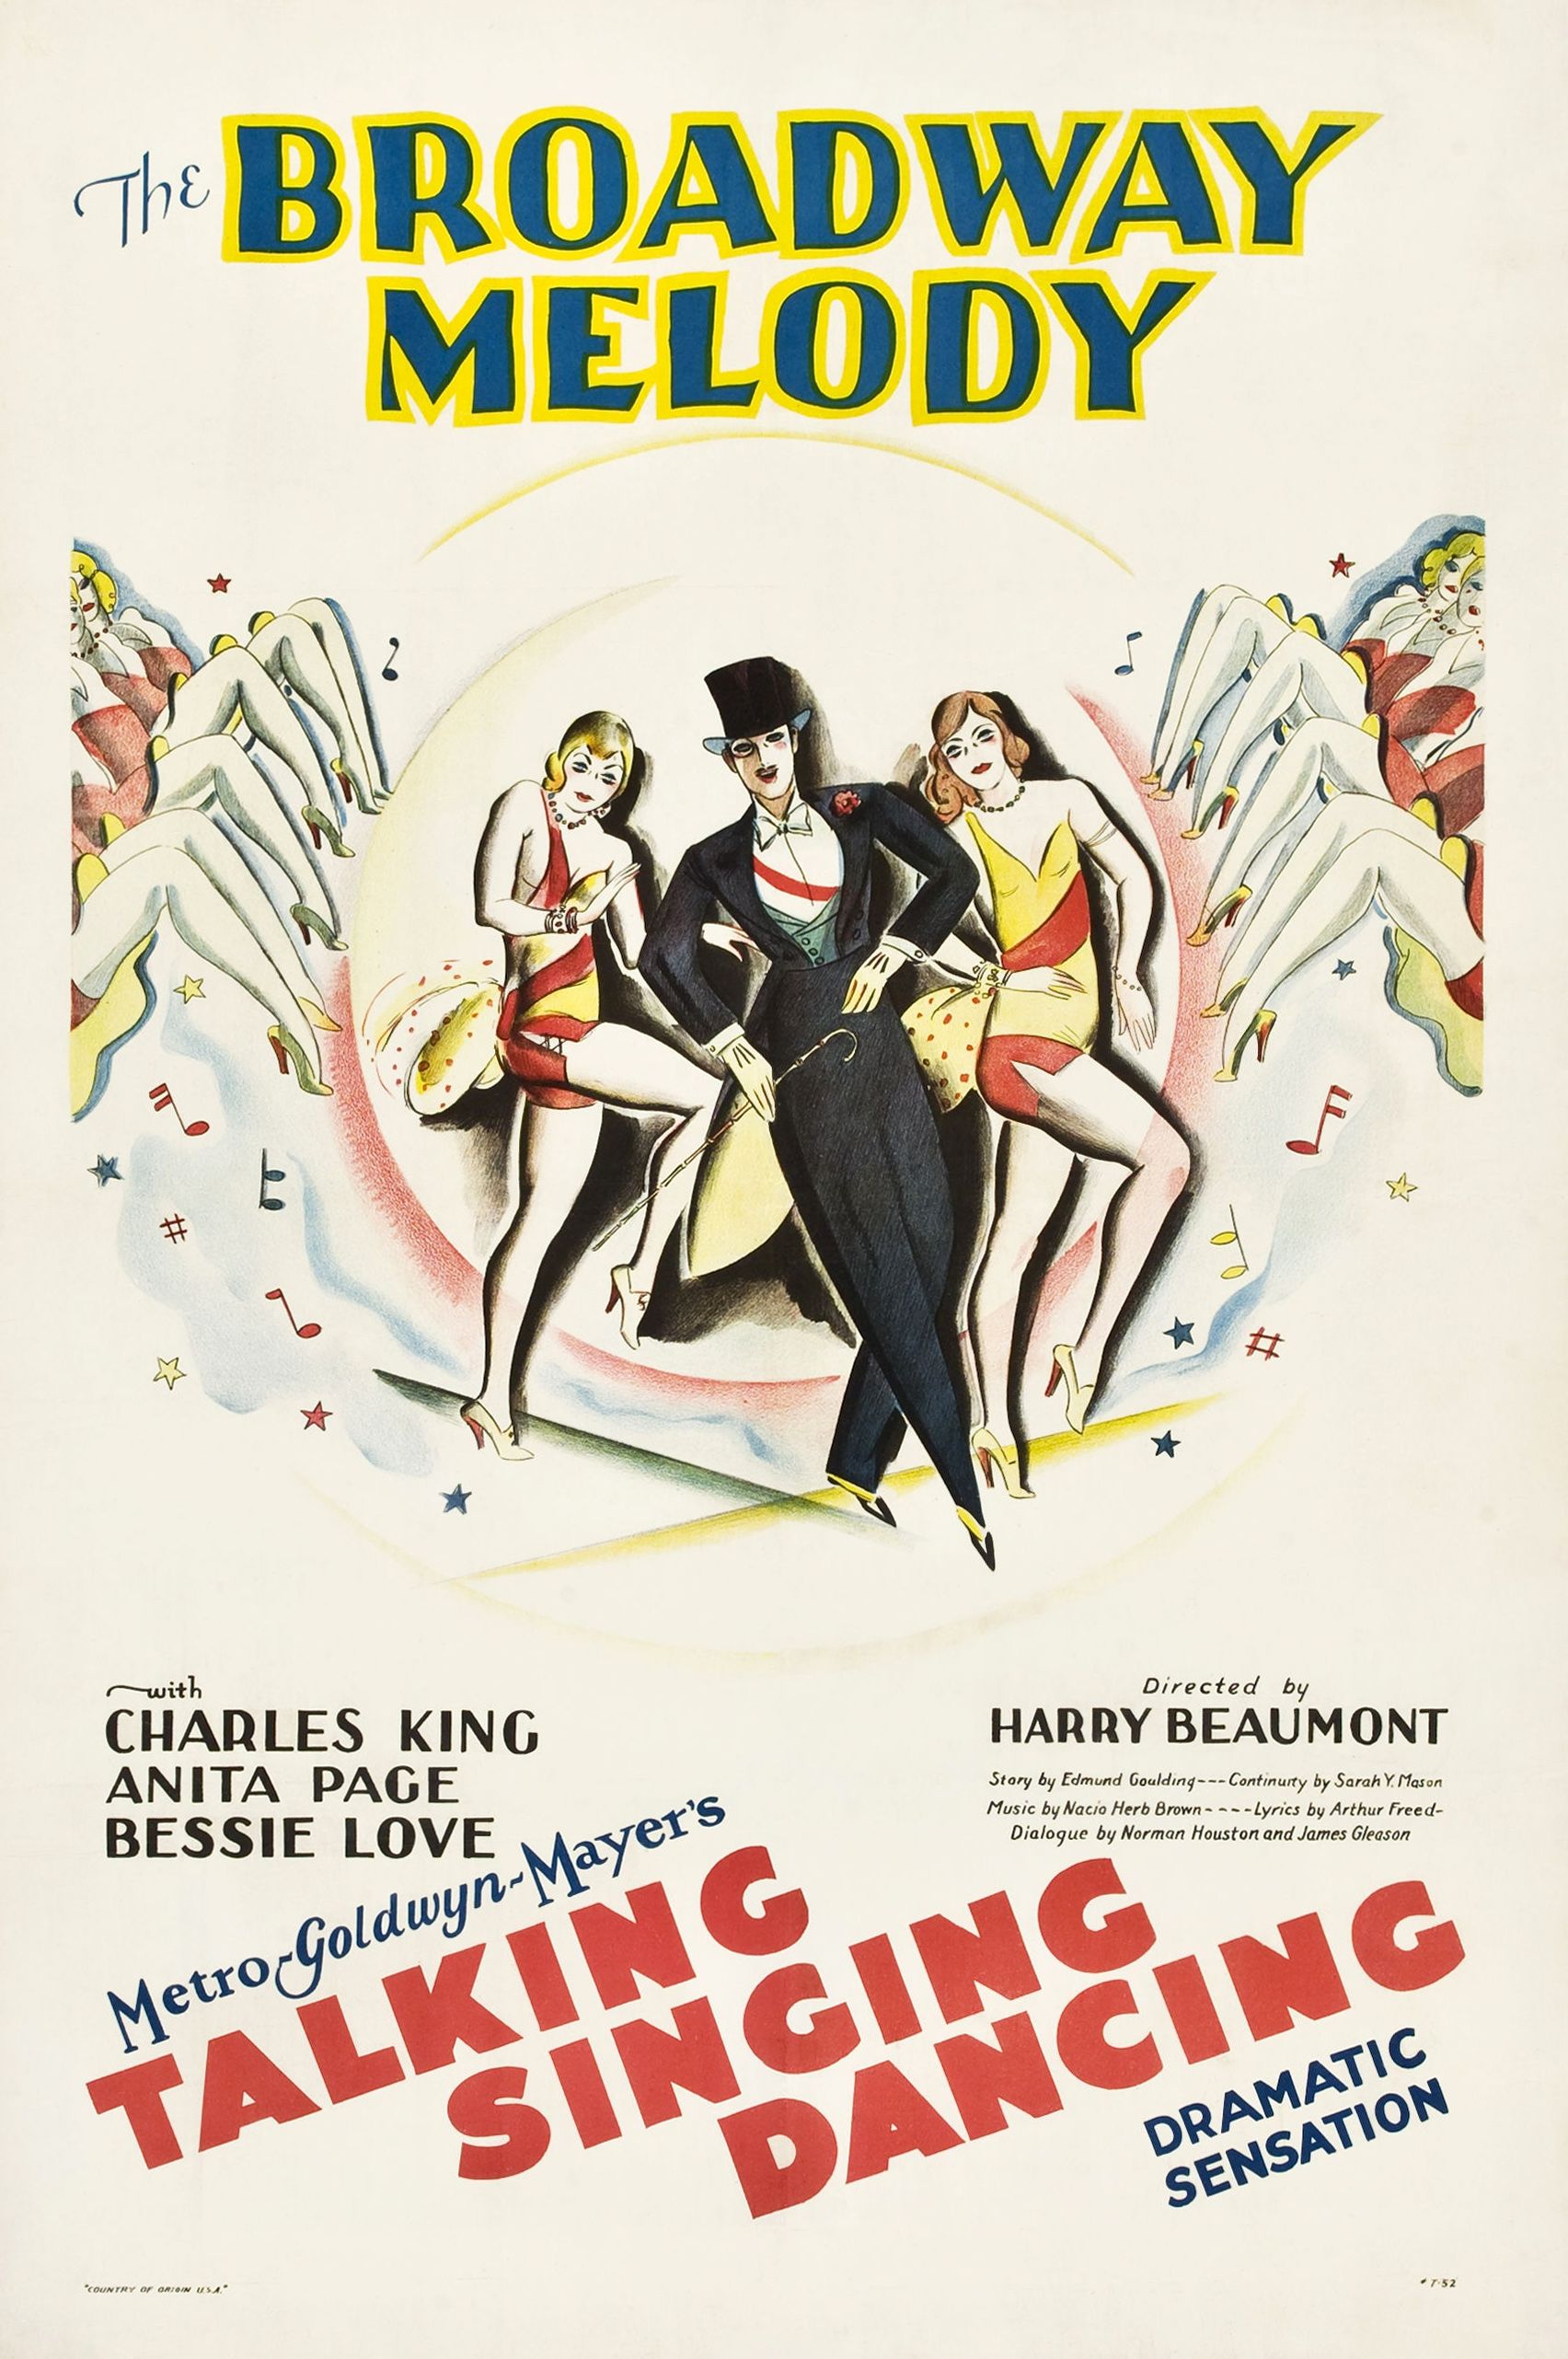 The Broadway Melody Film Poster